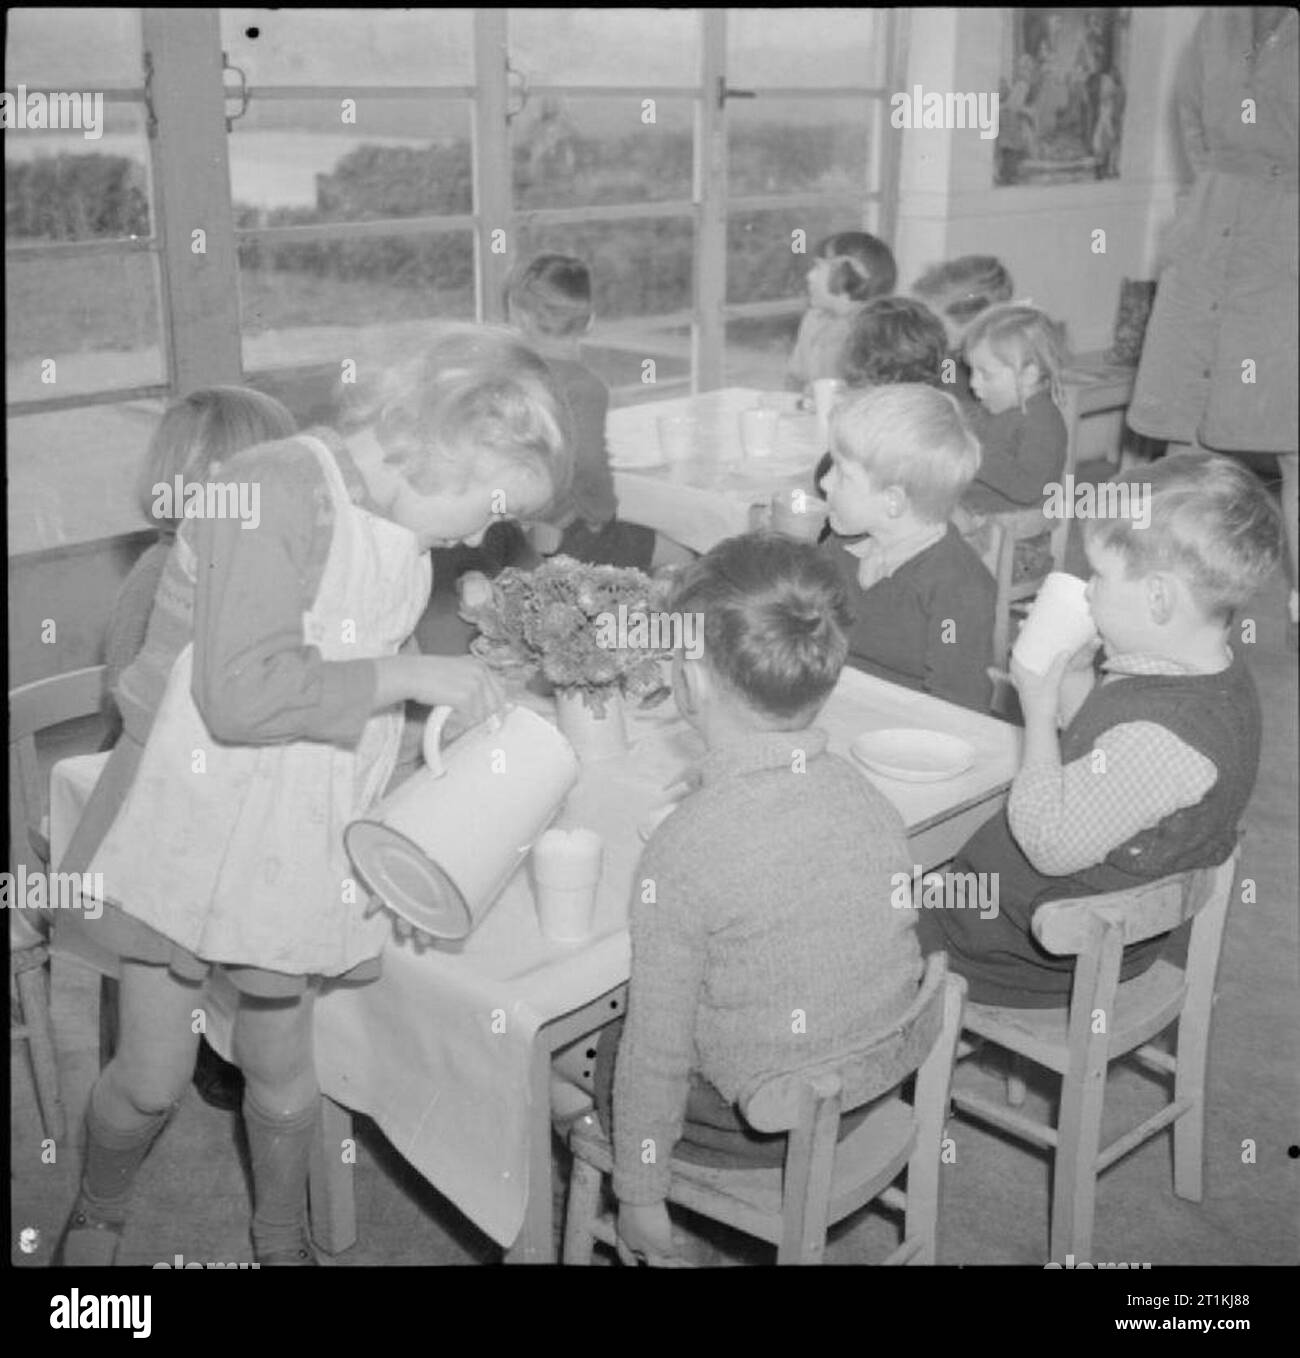 A Modern Village School- Education in Cambridgeshire, England, UK, 1944 At Bottisham Nursery School, children sit at tables to enjoy their mid-morning snack of fruit and milk. The children take it in turns to lay the tables and serve each other. Here, a young girl wearing an apron pours a cup of milk for one of her friends. The tables are set out nicely, complete with table cloths and flowers. Stock Photo